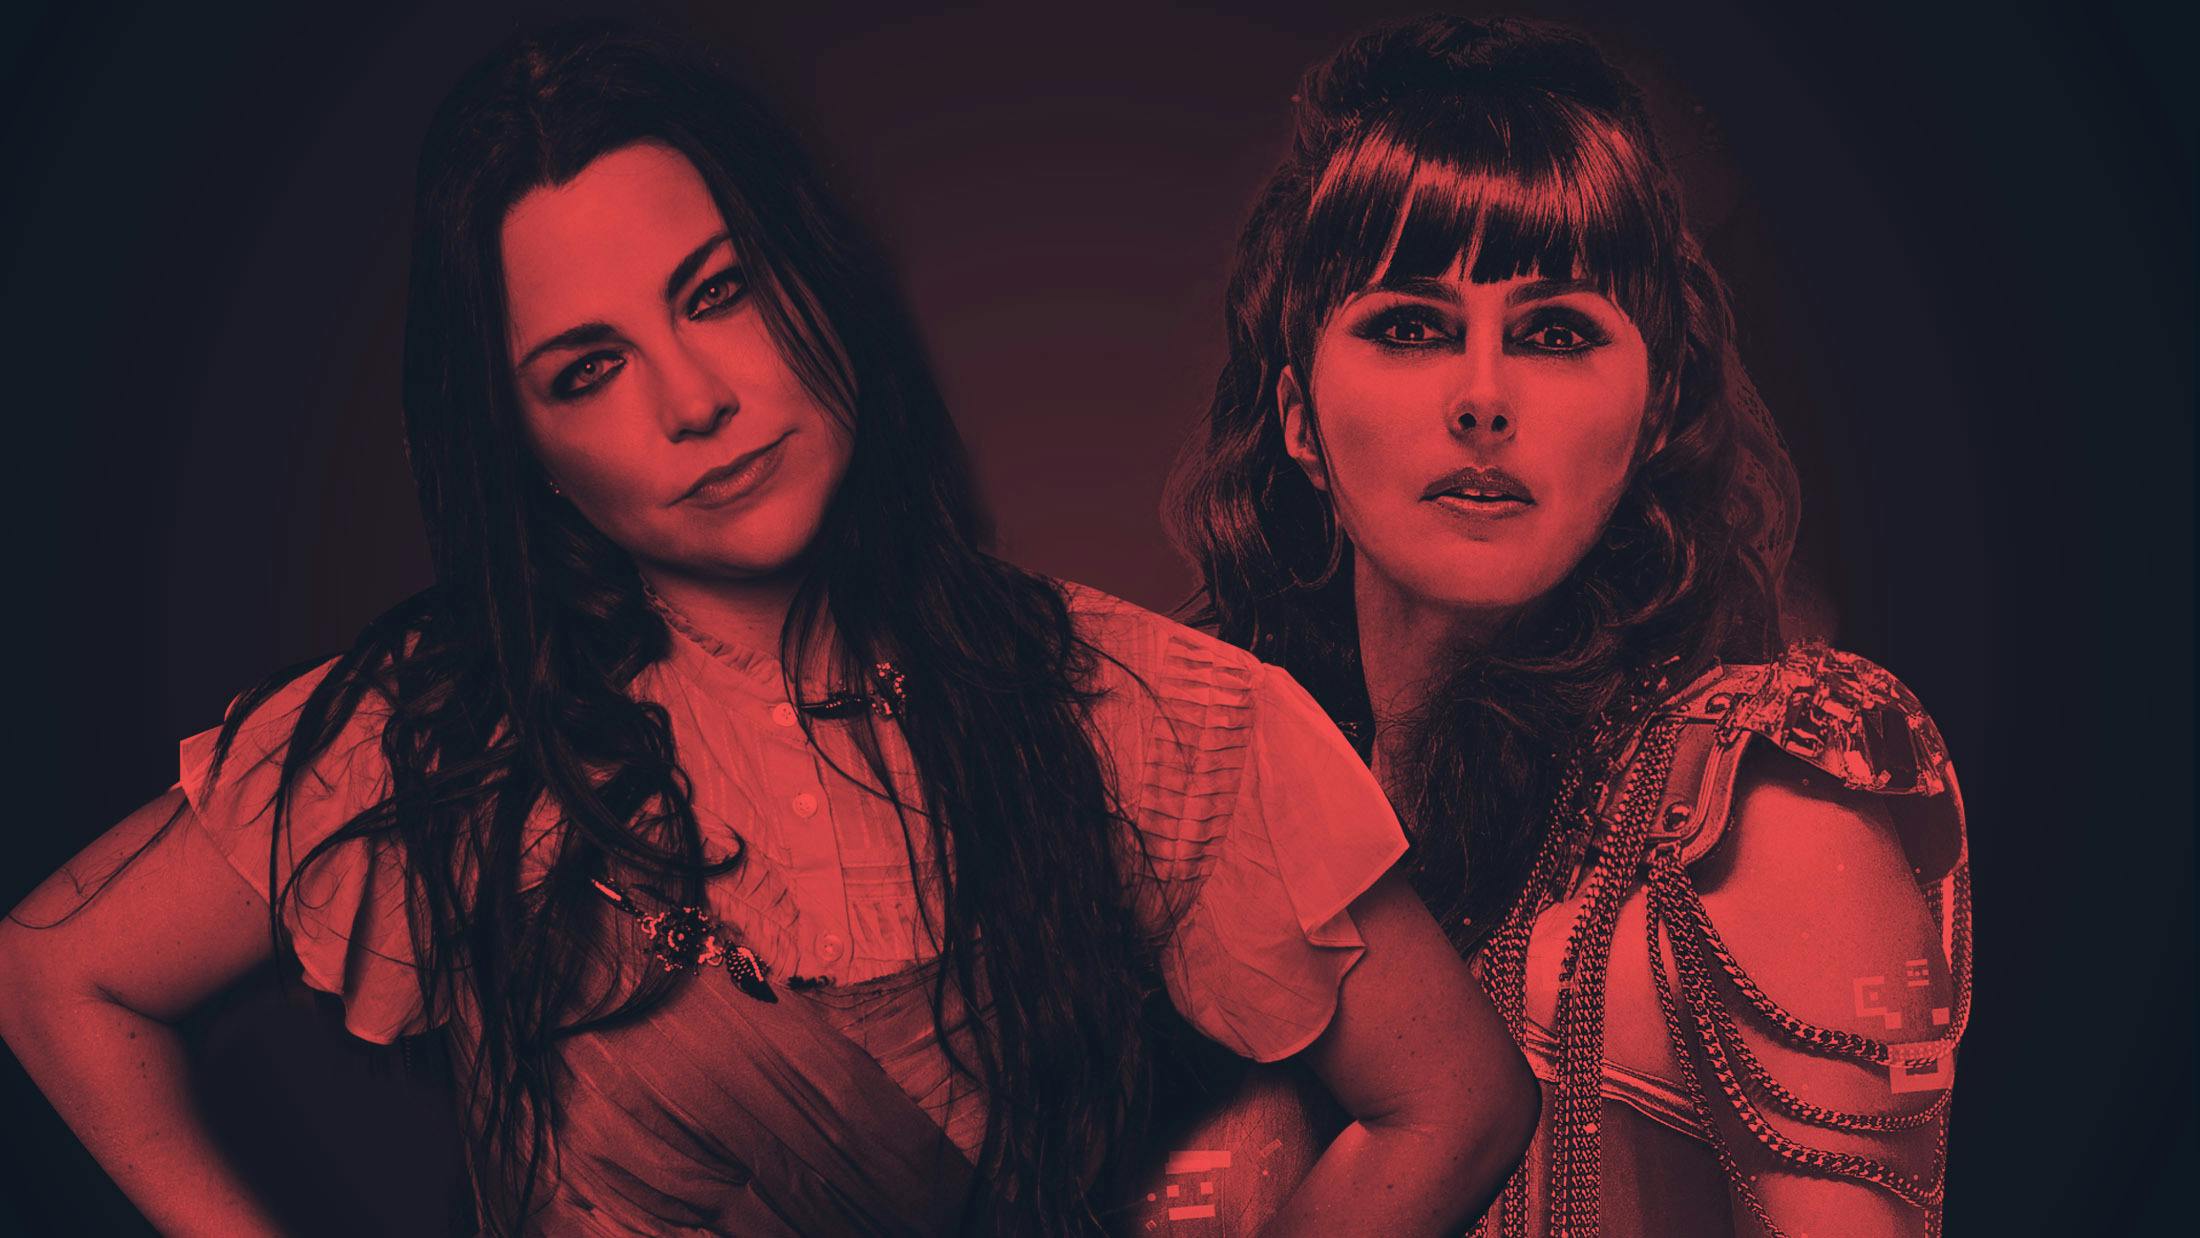 "We Instantly Connected In A Beautiful Way": An Epic Conversation With Amy Lee And Sharon Den Adel